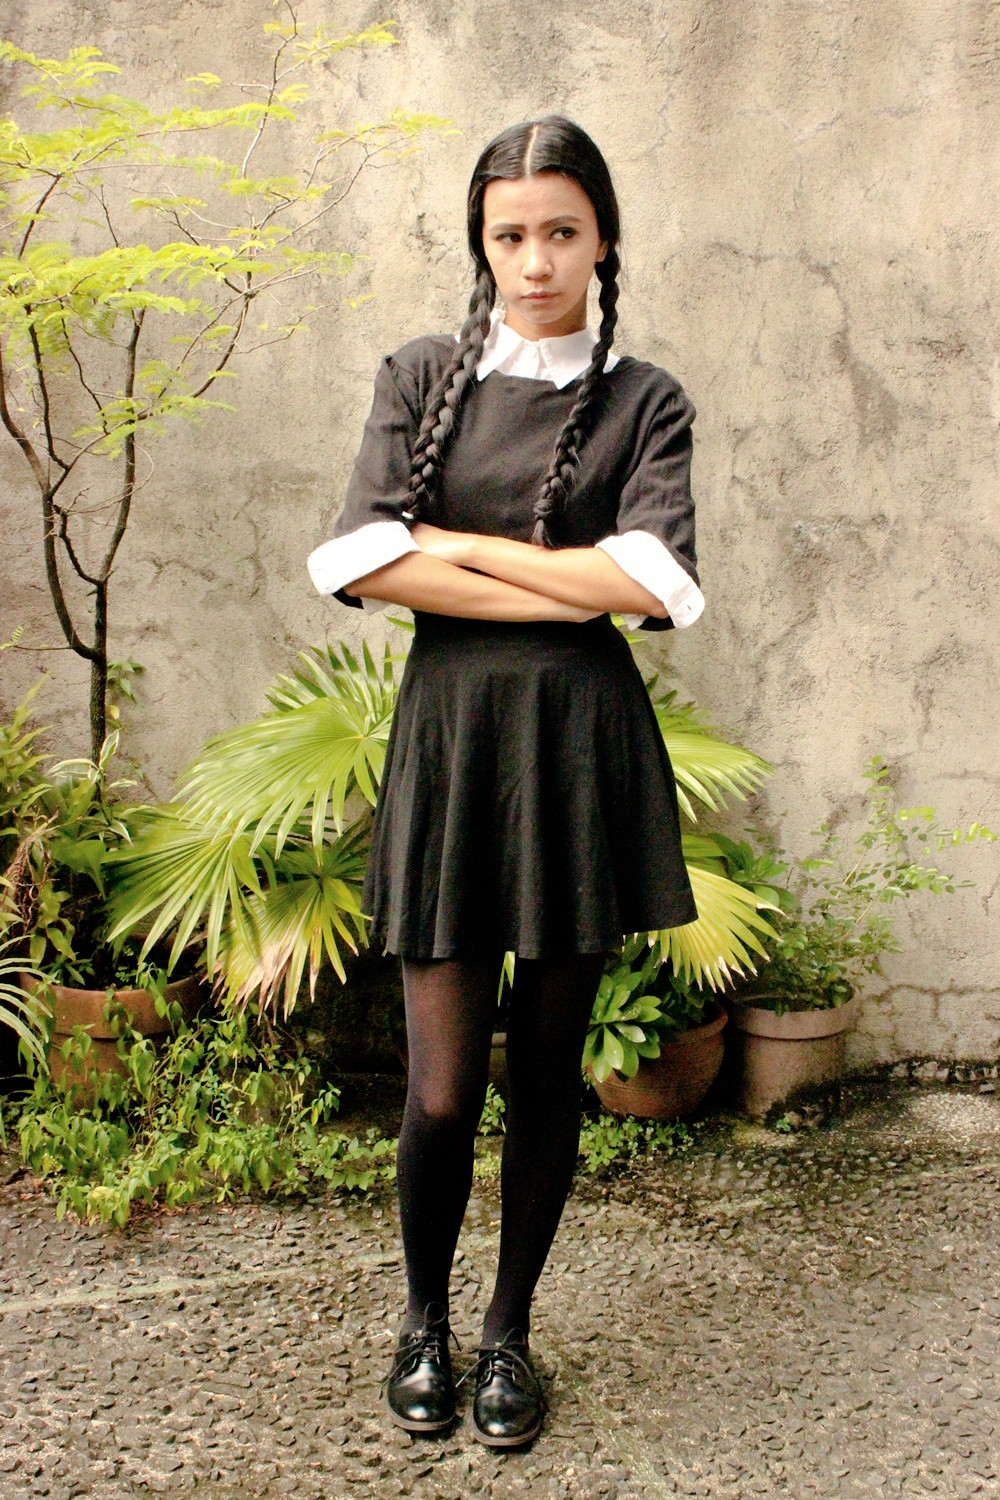 The Best Ideas for Diy Wednesday Addams Costume - Home, Family, Style ...